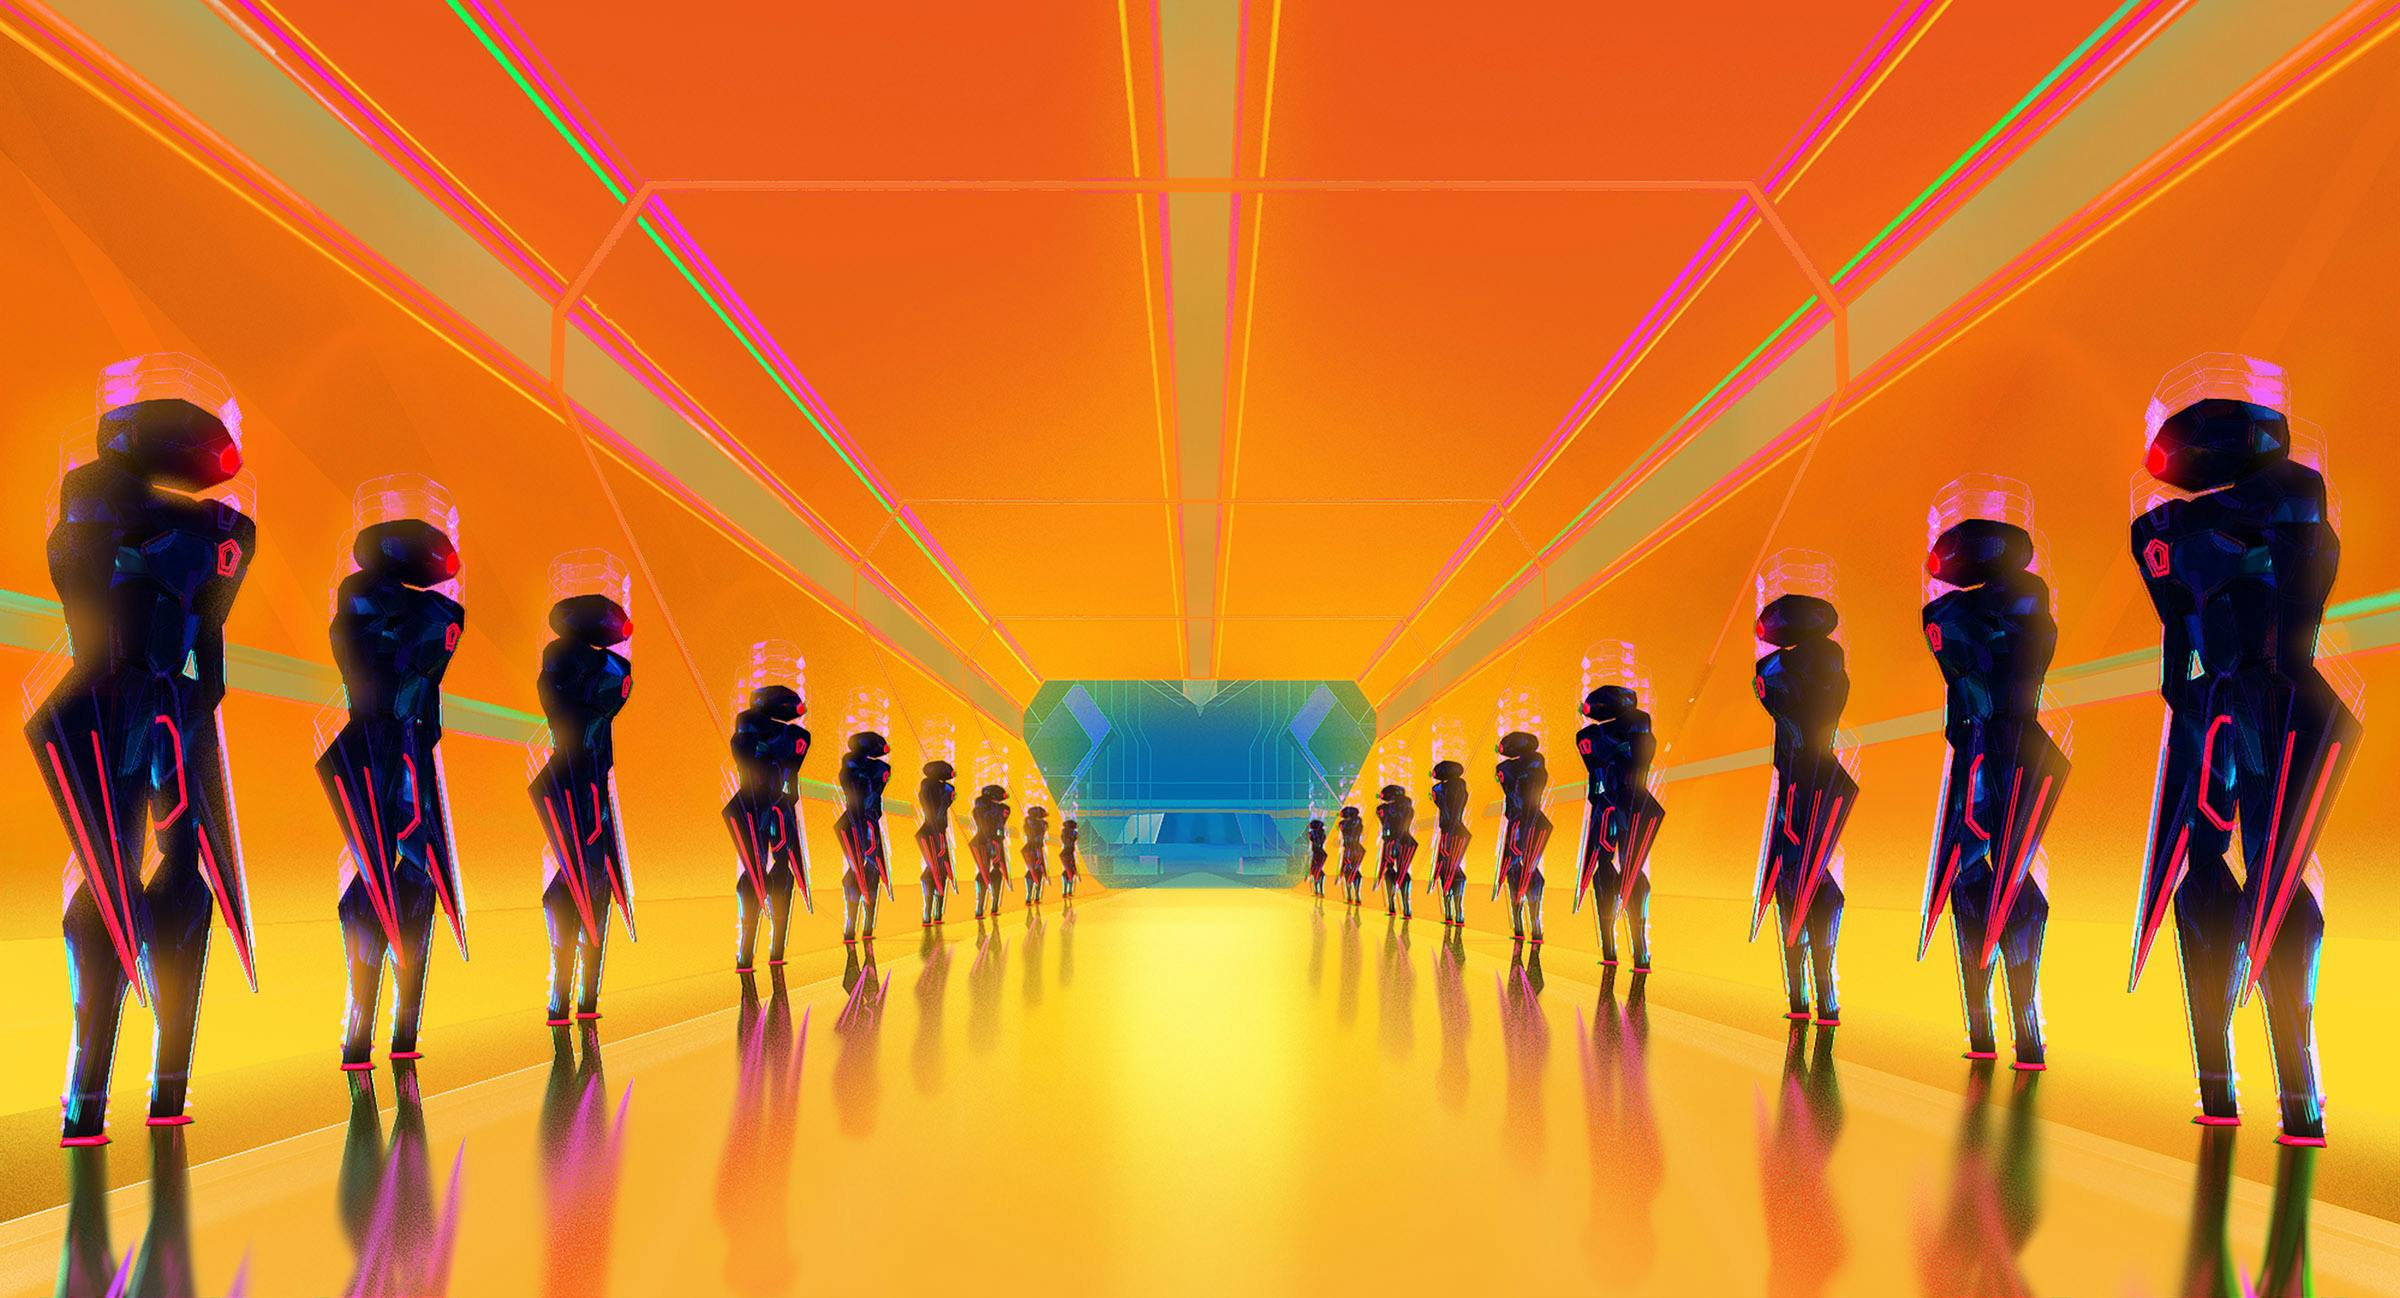 Two lines of robots face off in a bright orange and yellow hallway. 